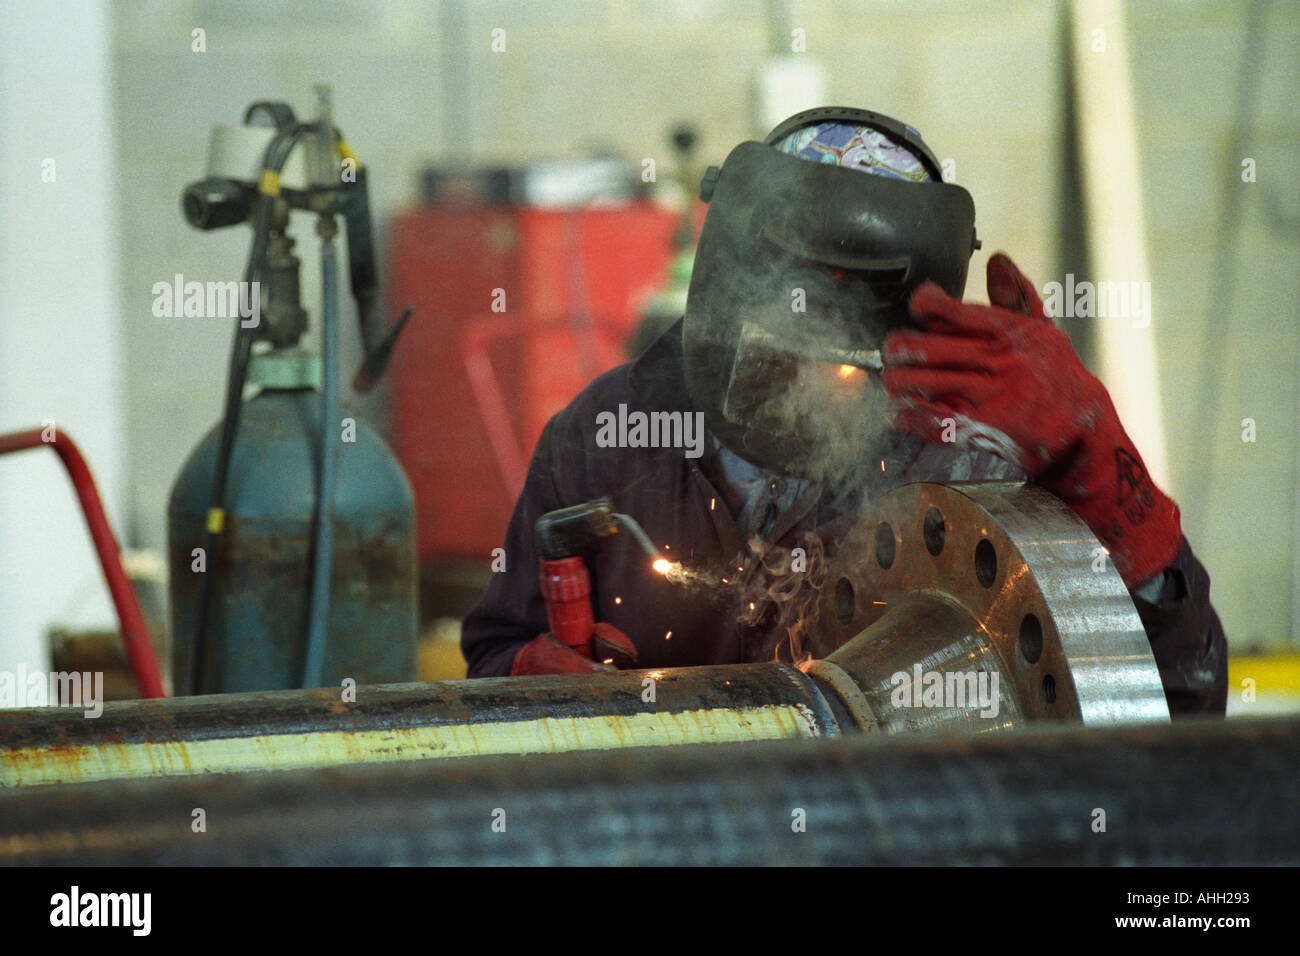 Welder working on a pipe for the oil industry in Milford Haven Pembrokeshire West Wales UK Stock Photo